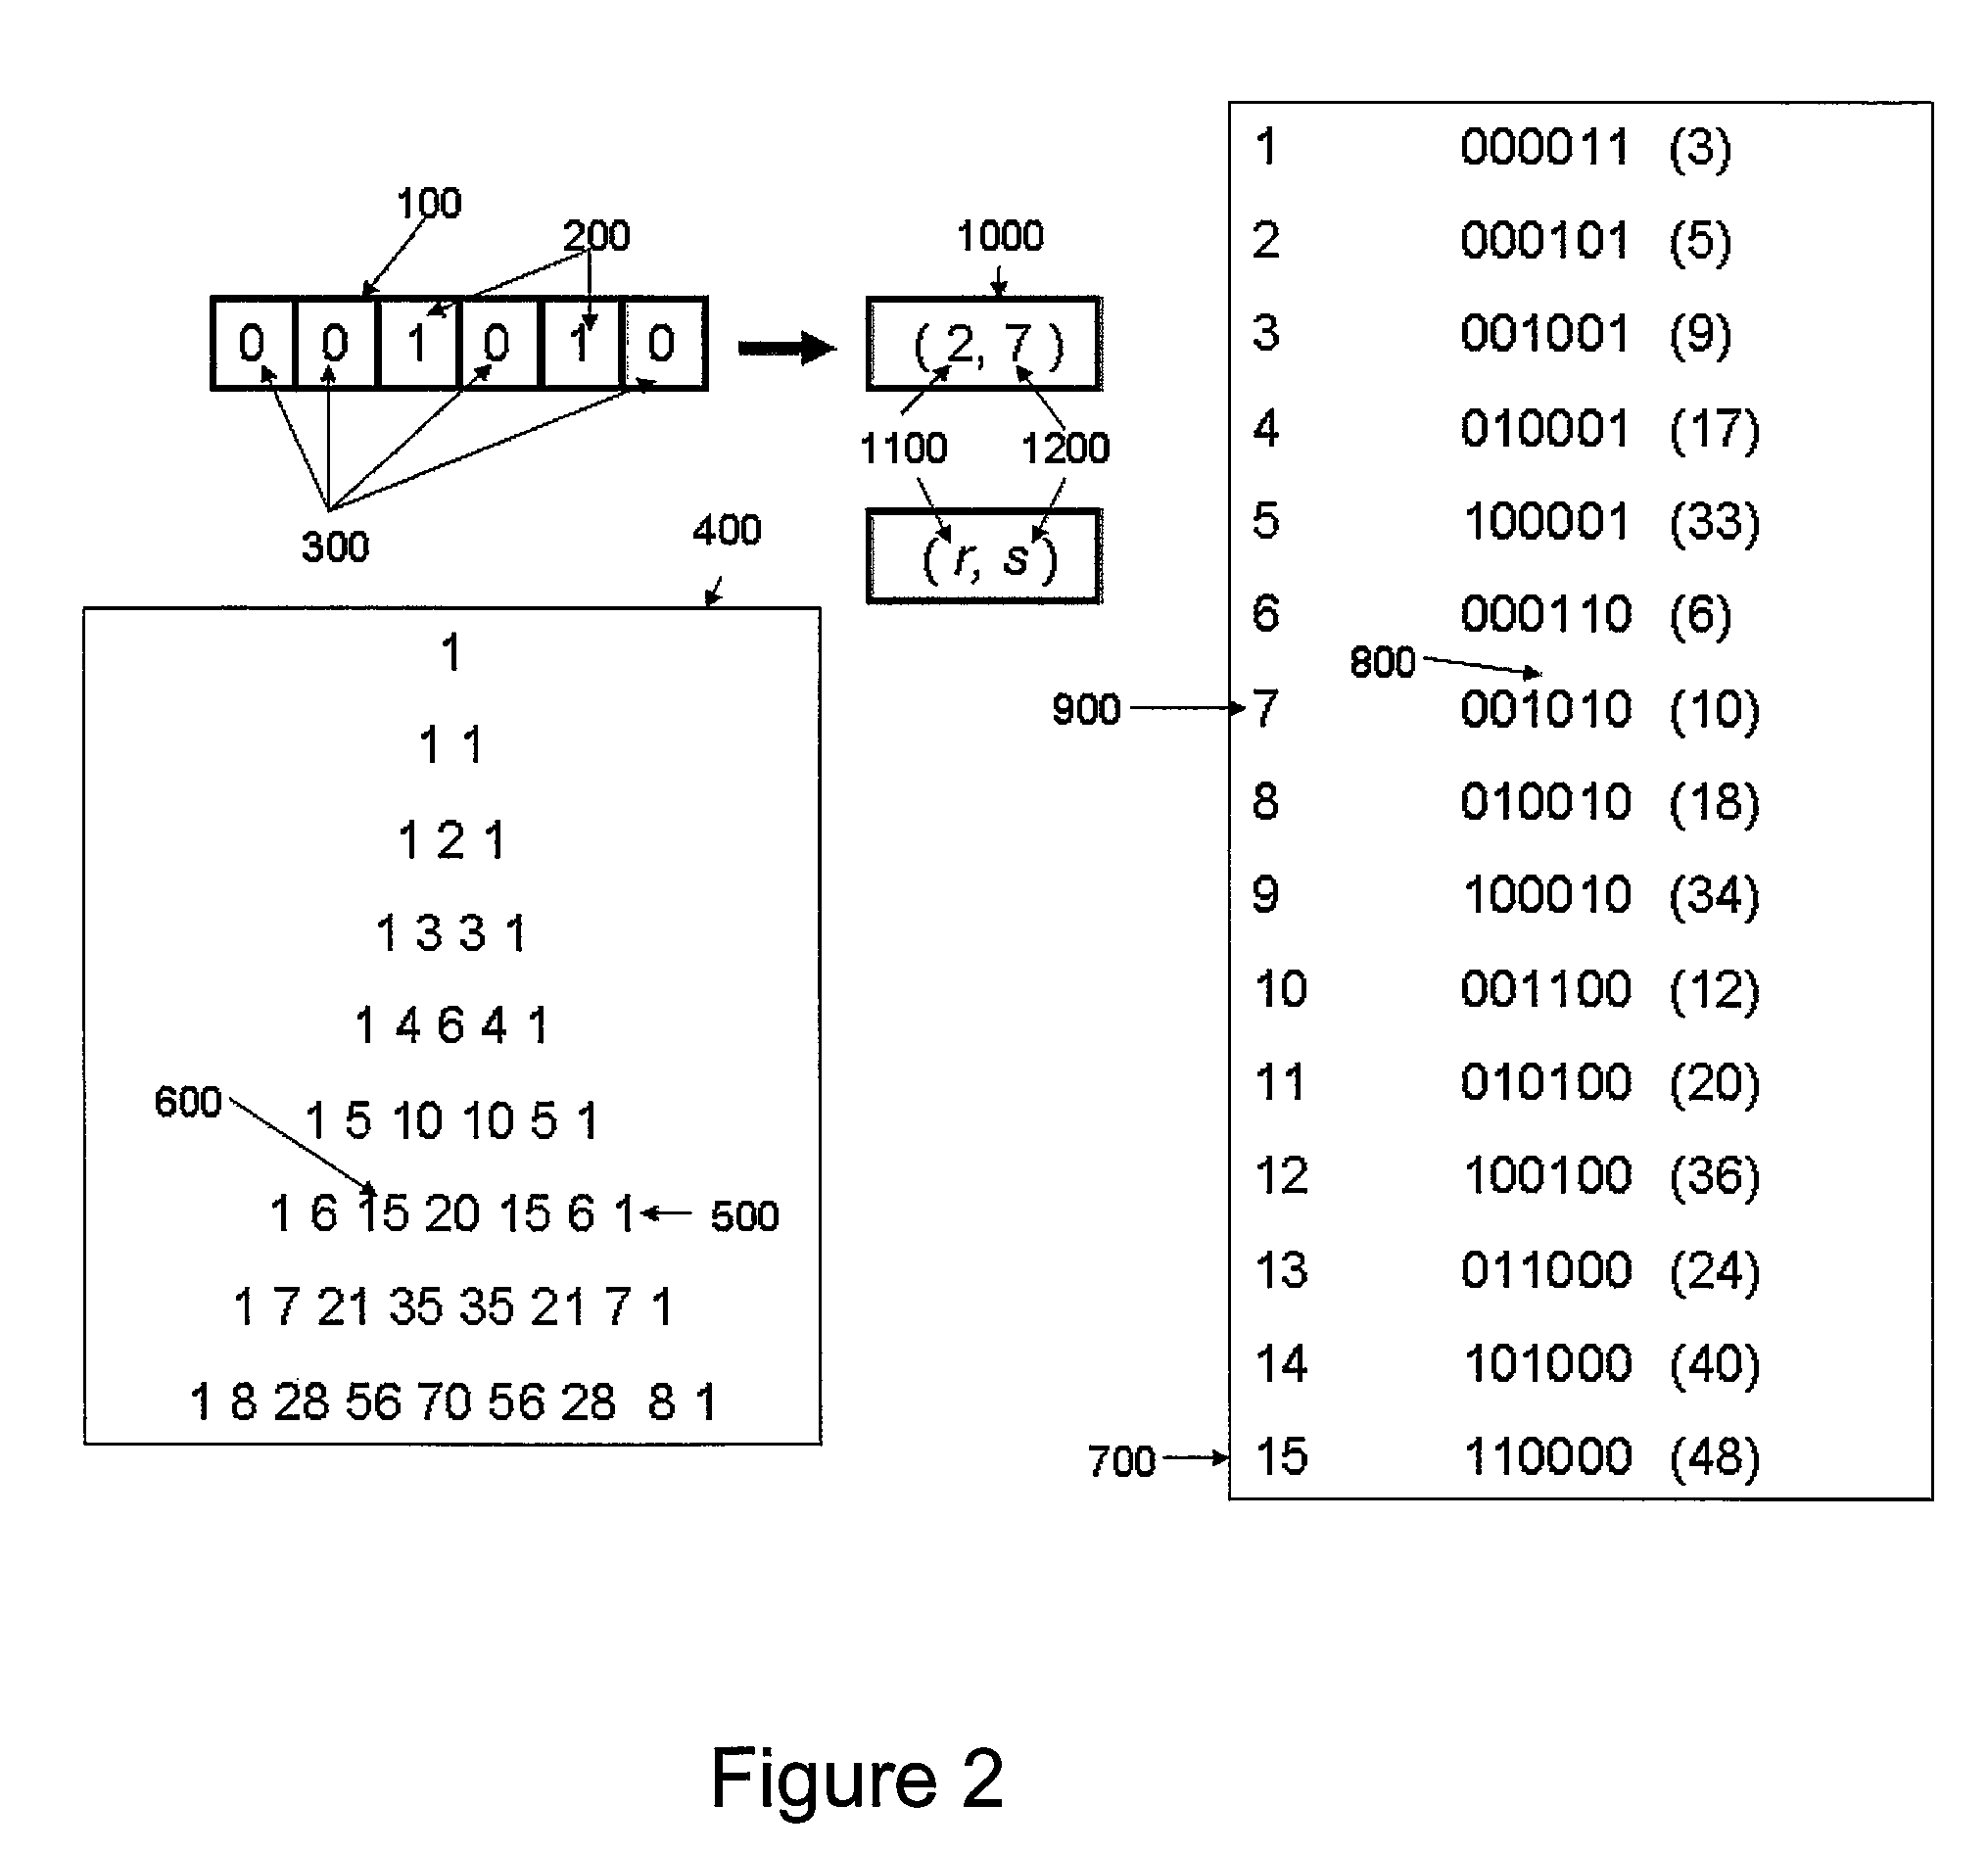 Combinatorial coding/decoding for electrical computers and digital data processing systems